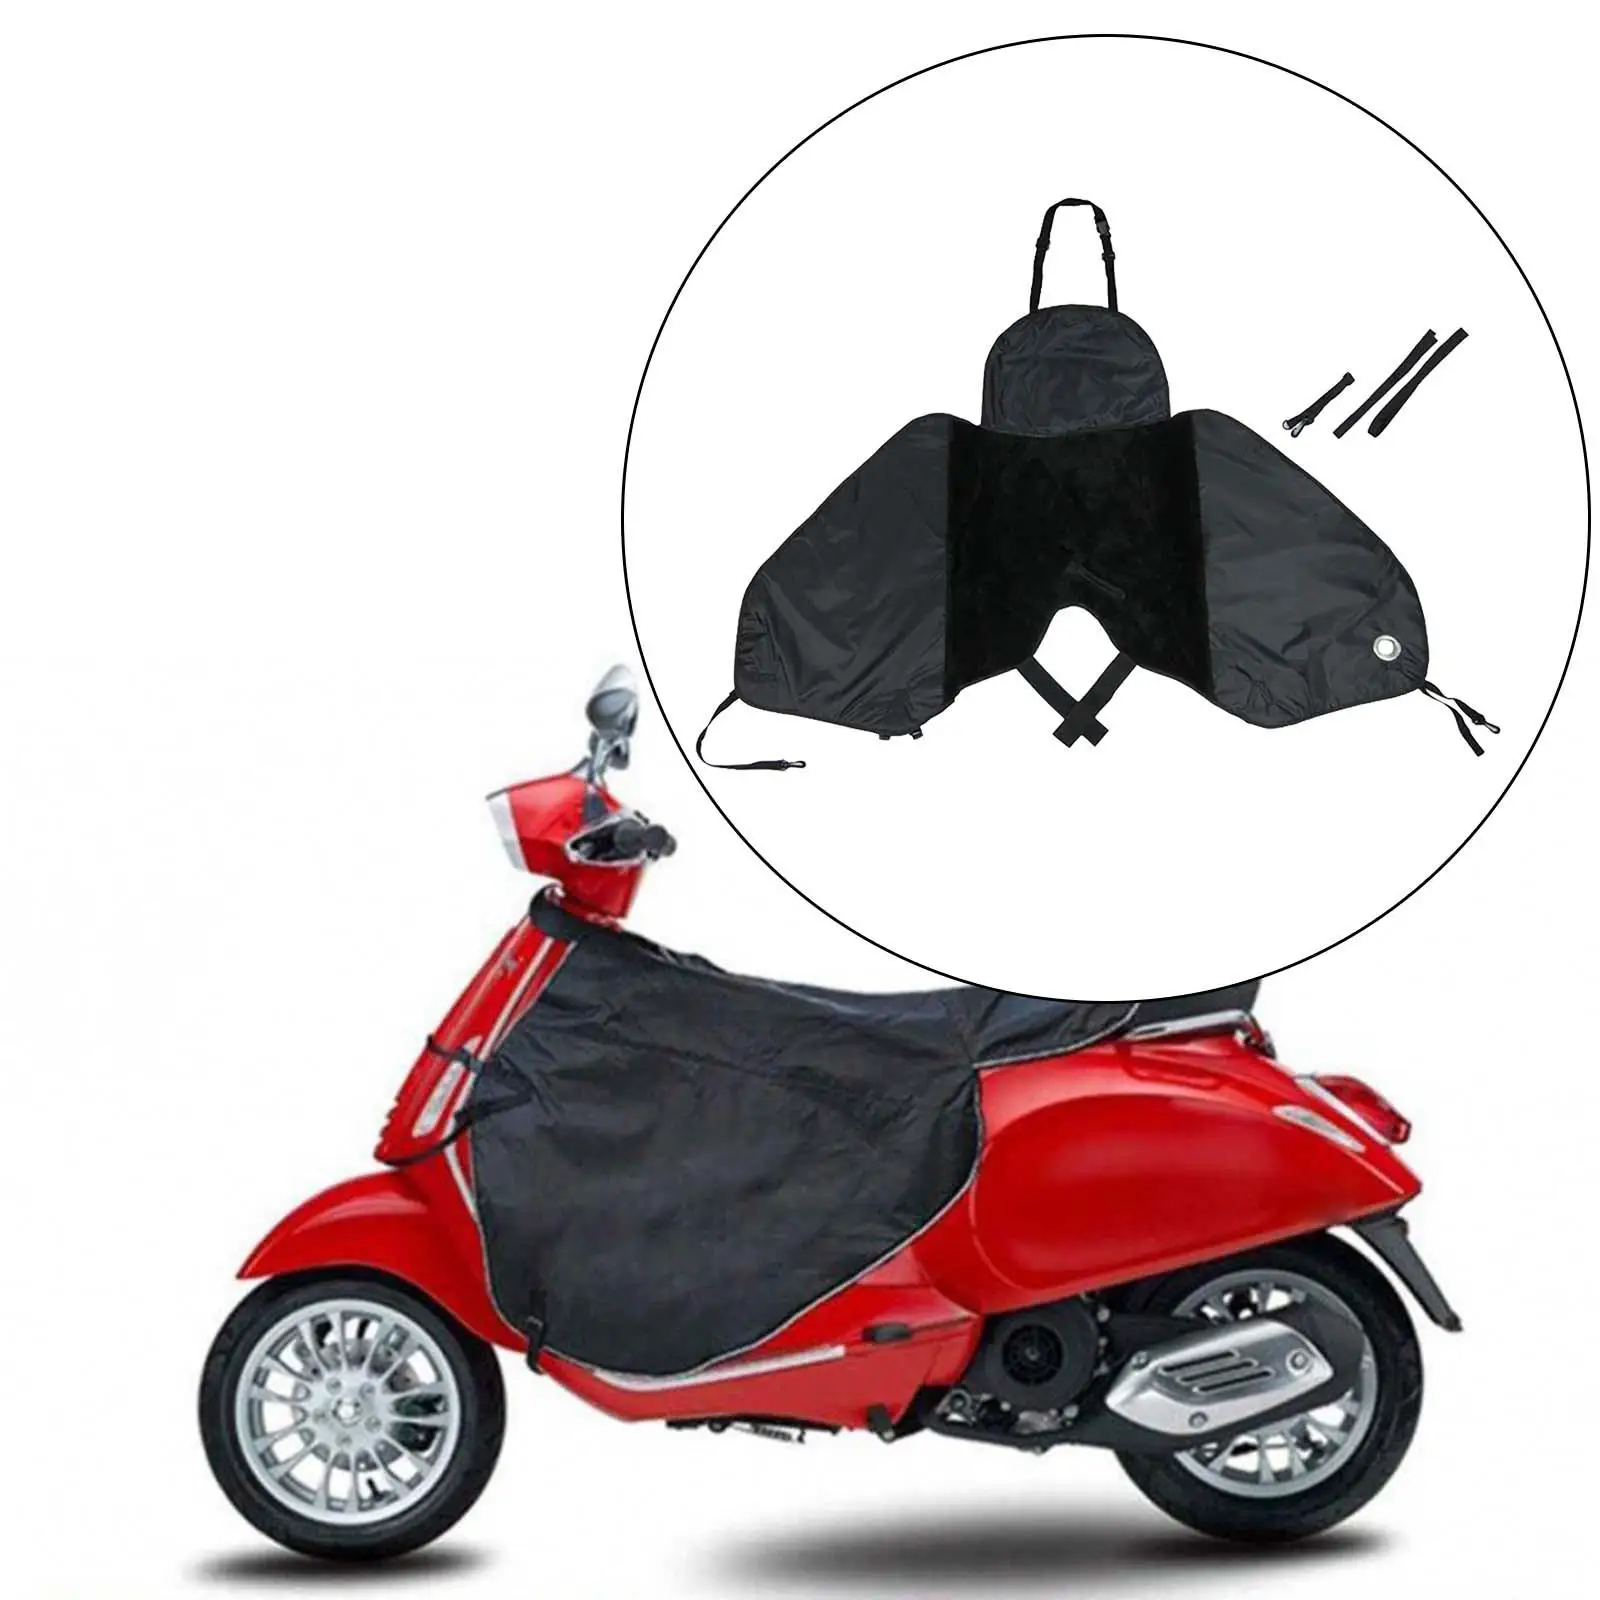 Motorcycle Windproof Quilt Waterproof Multifunction Lap Cover Protection Fittings Warm Riding Apron Rain Cover Cold Prevent